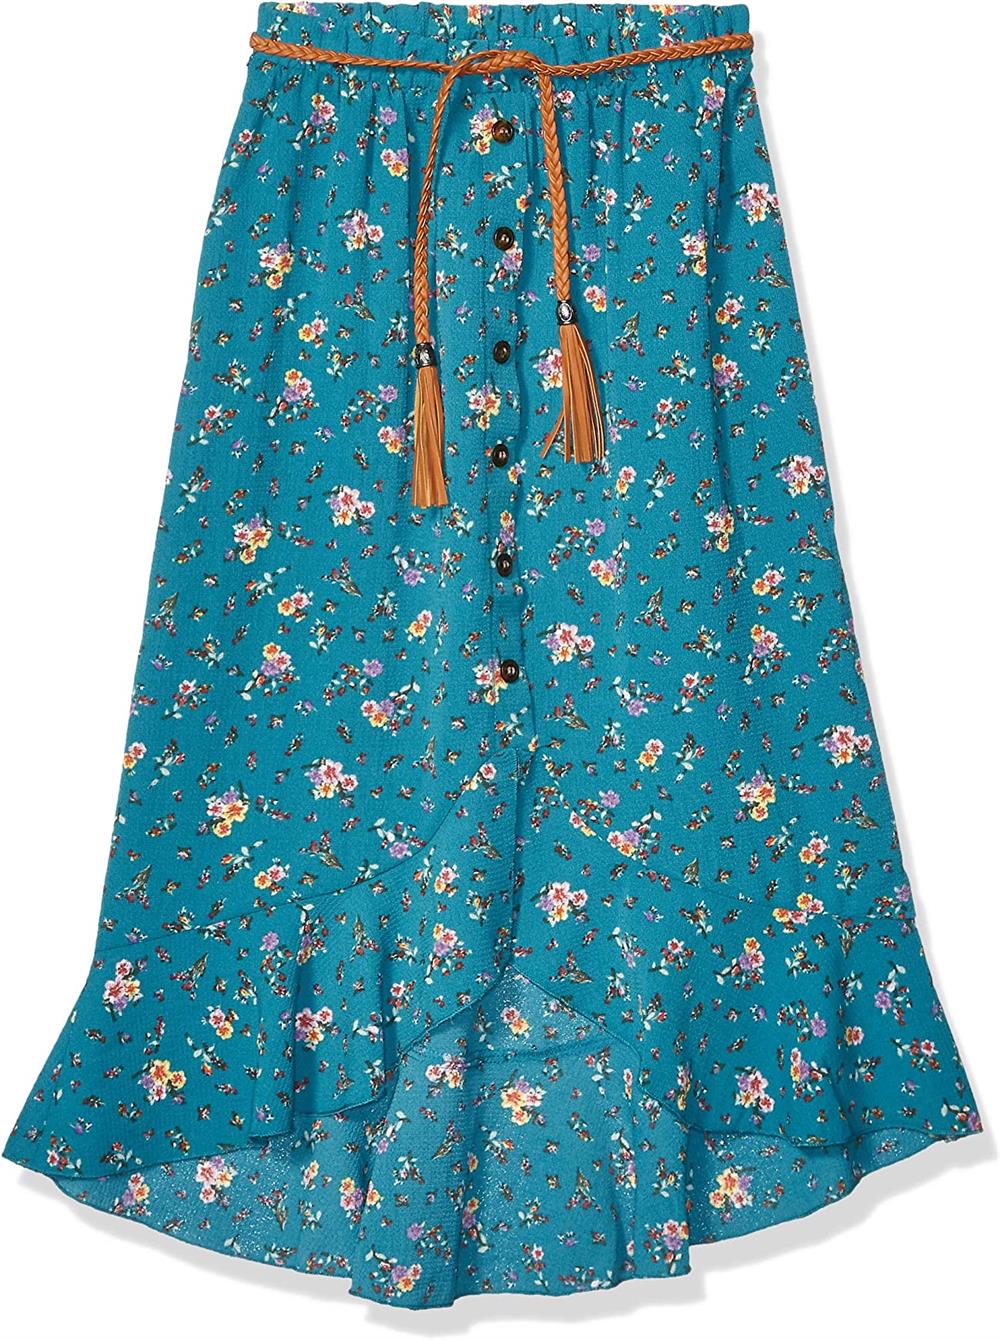 Amy Byer Girls 7-16 Belted Floral Skirt